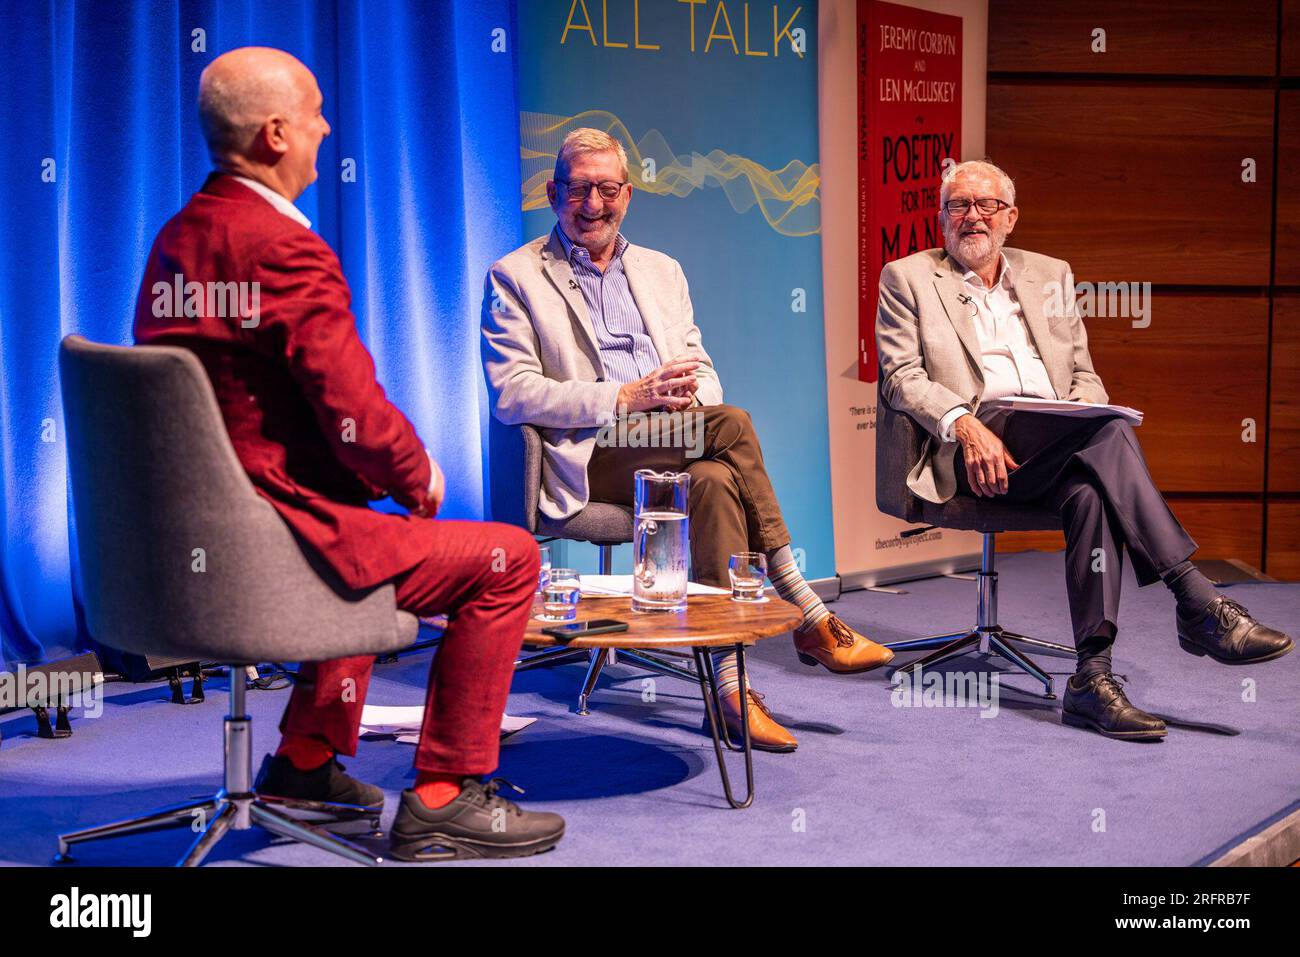 Edinburgh, United Kingdom. 05 August, 2023 Pictured: Iain Dale, Len McCluskey and Jeremy Corbyn. Former Labour leader Jeremy Corbyn MP and renowned trade unionist Len McCluskey are interviewed by LBC presenter Iain Dale at the Edinburgh Fringe. During the interview McCluskey accused Keir Starmer of reneging on an agreement to retain Corbyn in the Labour Party. Jeremy Corbyn was quizzed if he will stand as an independent candidate in his constituency and responded by saying ‘watch this space’. Credit: Rich Dyson/Alamy Live News Stock Photo